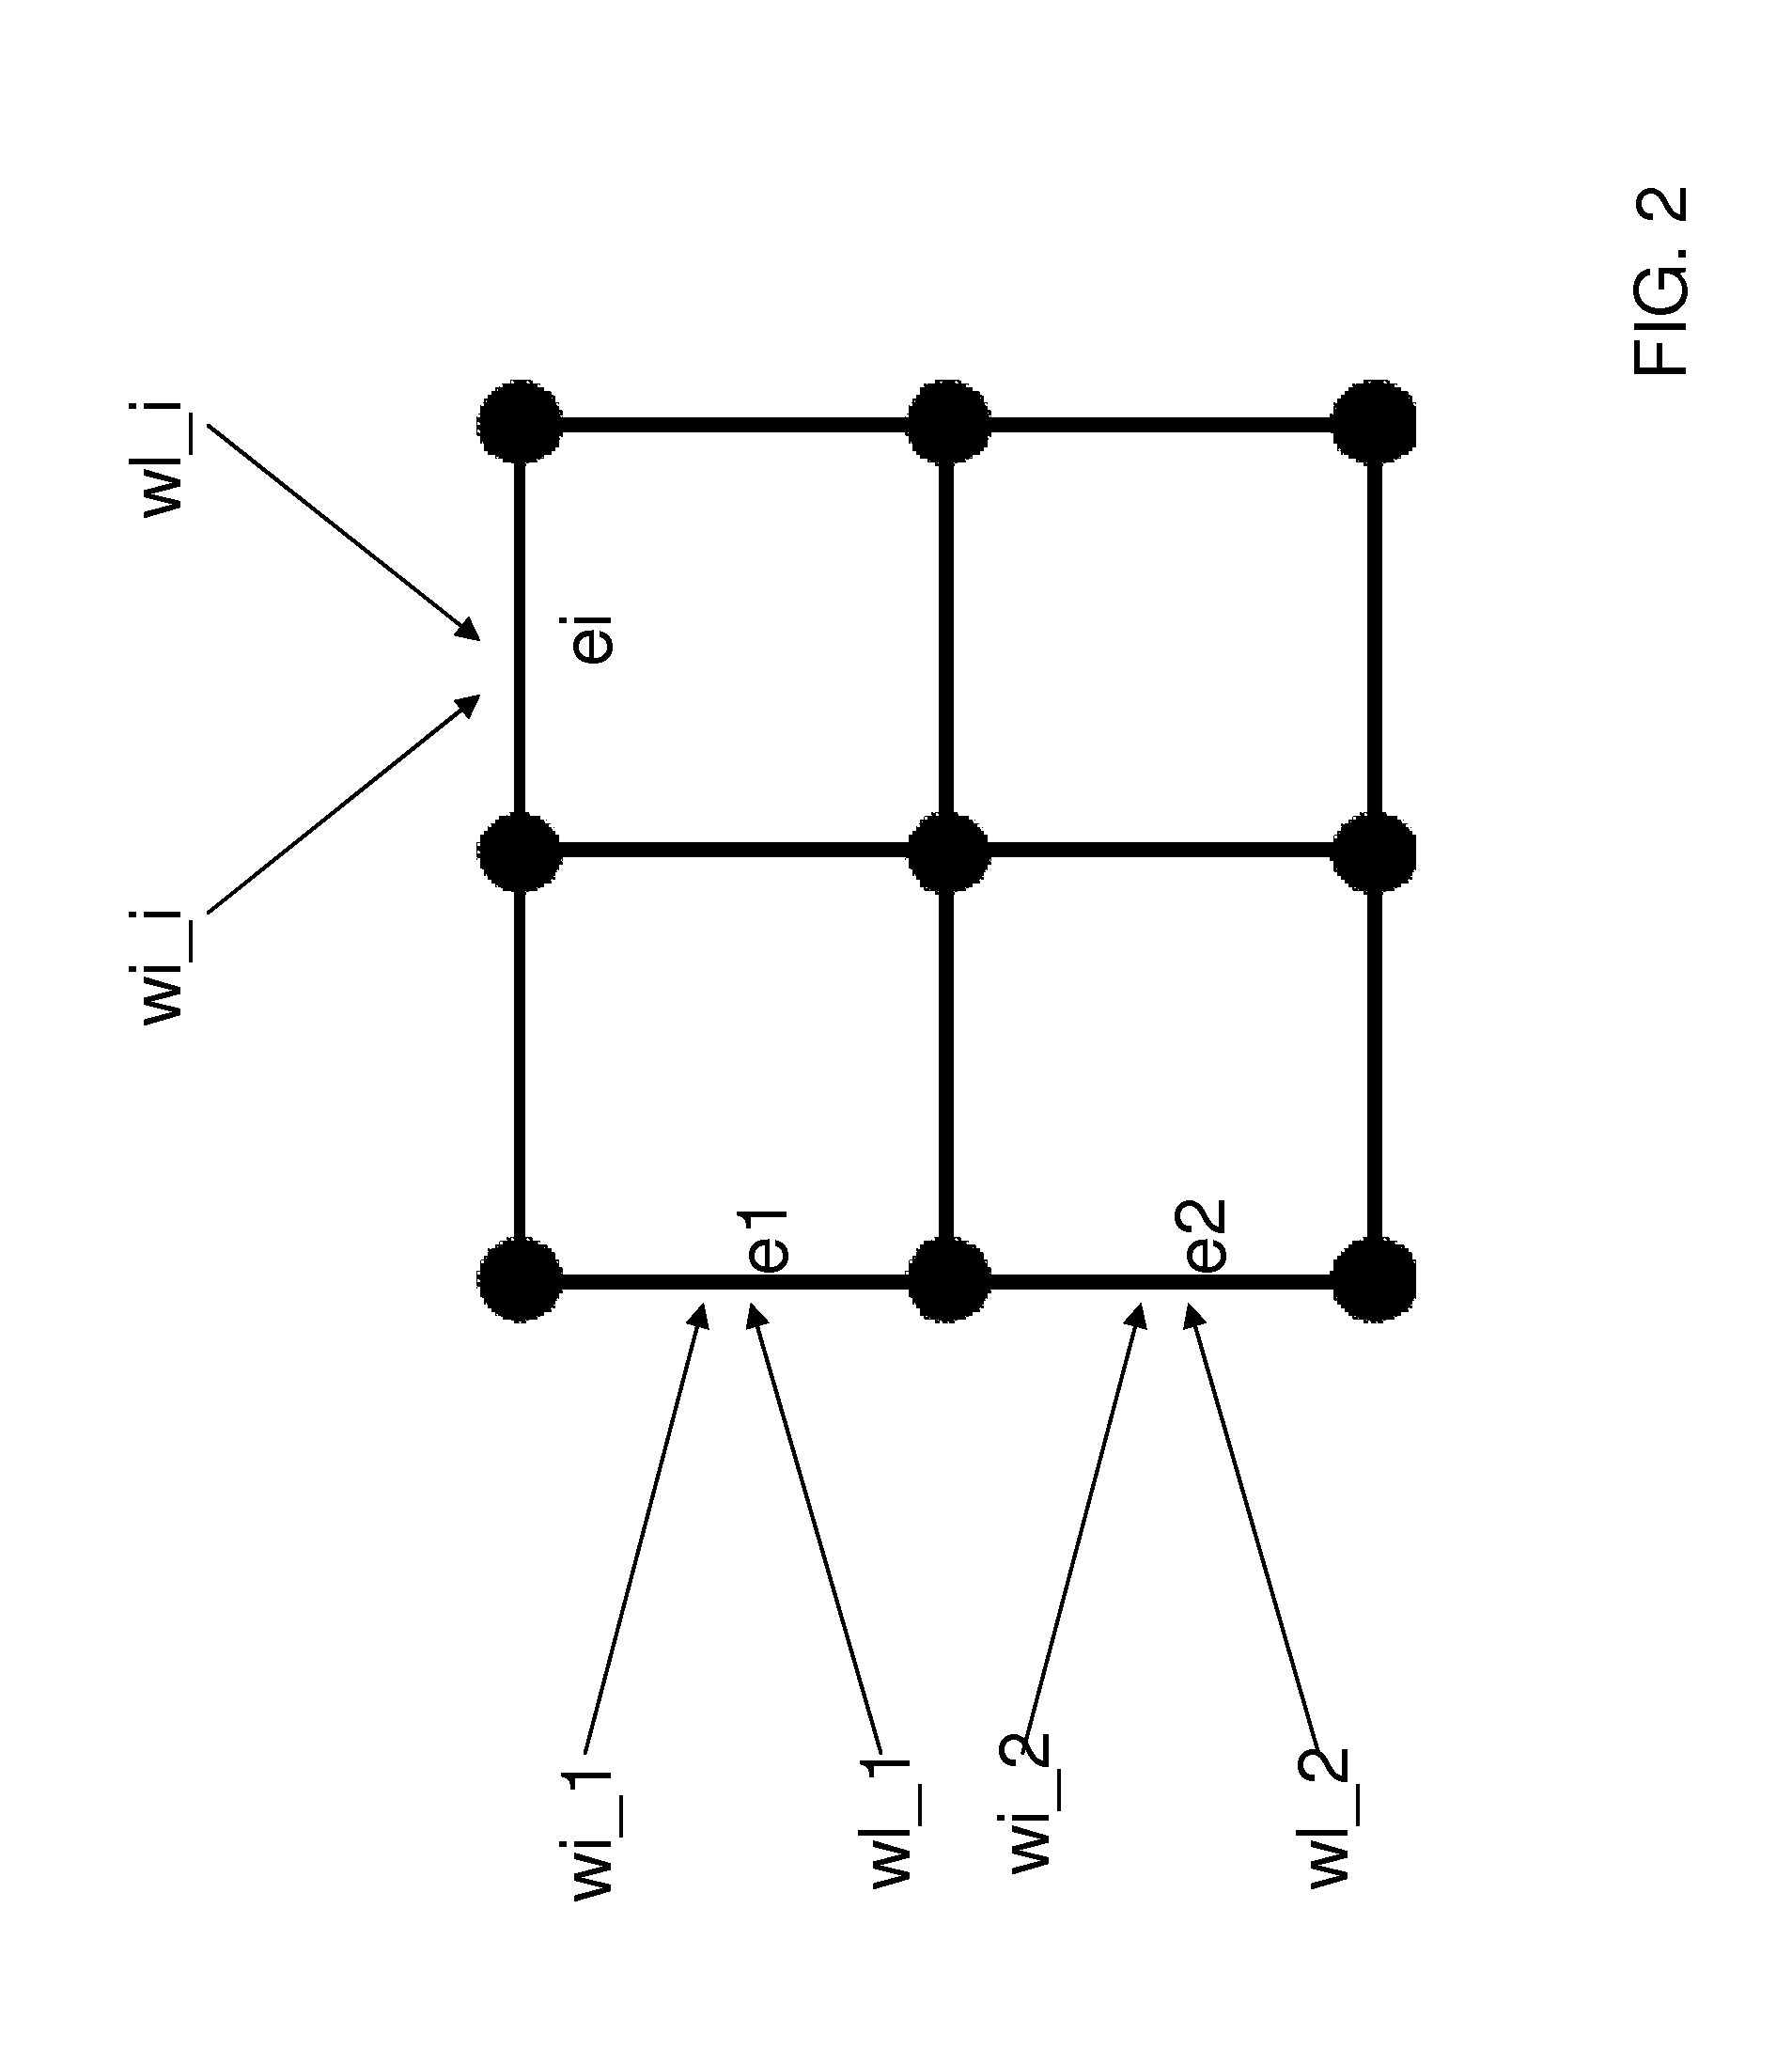 Efficient evaluation of network robustness with a graph